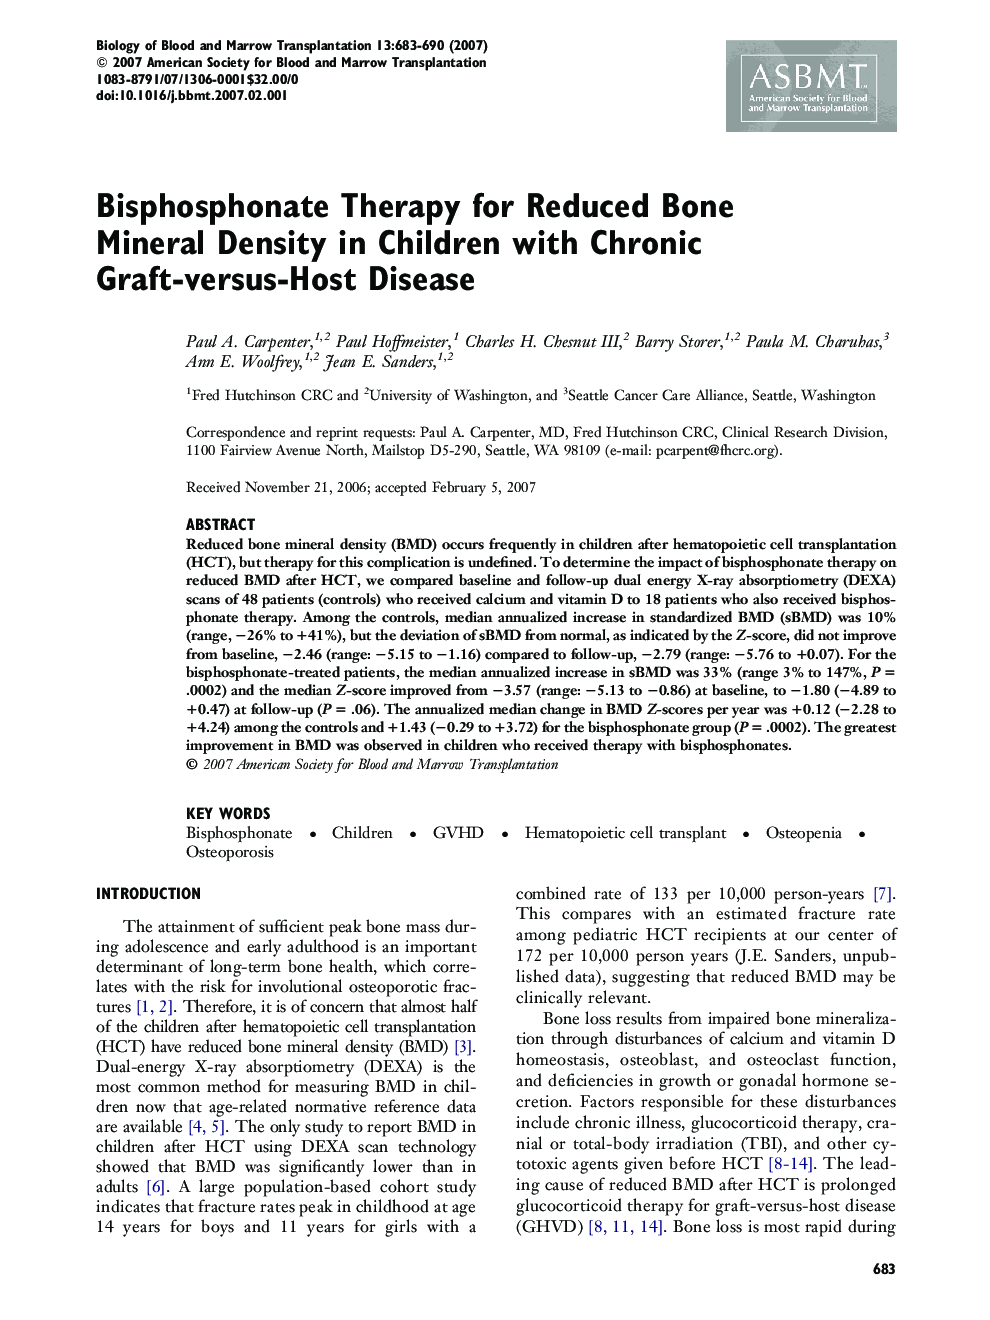 Bisphosphonate Therapy for Reduced Bone Mineral Density in Children with Chronic Graft-versus-Host Disease